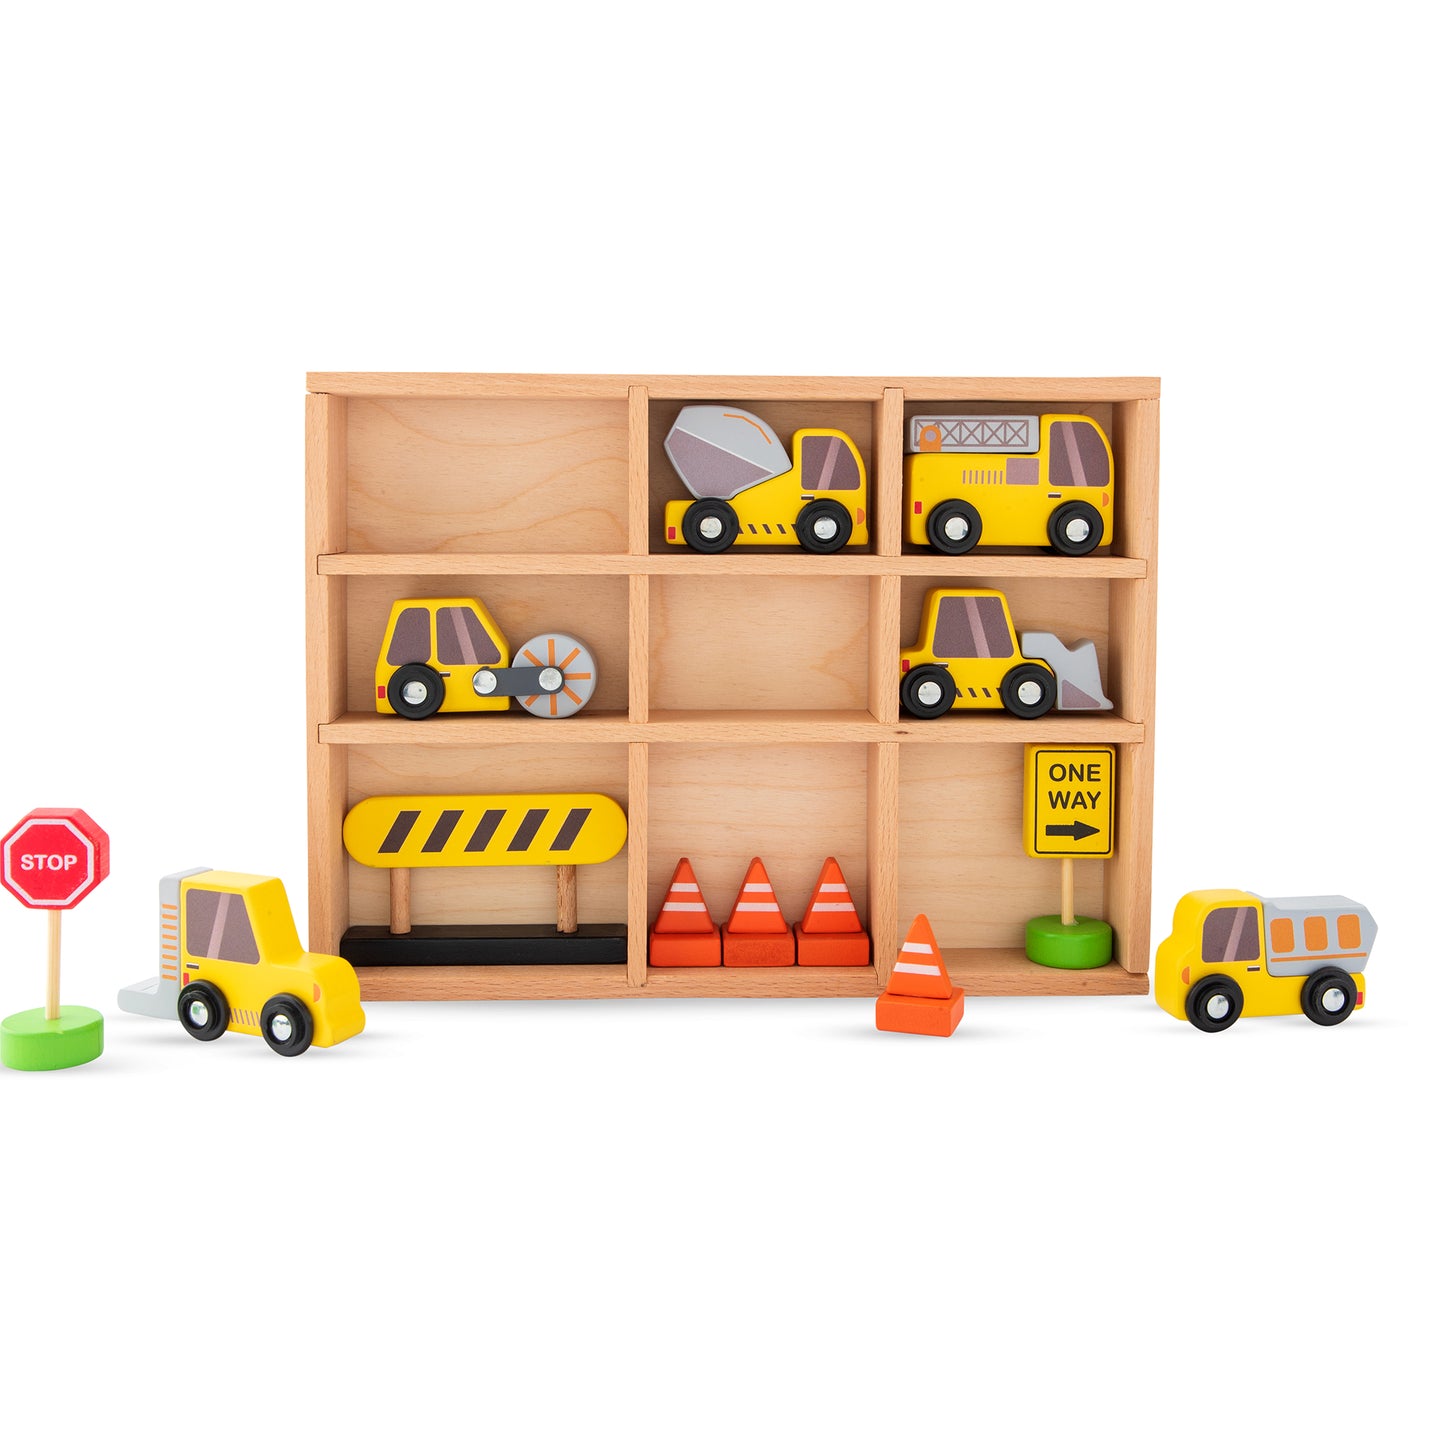 Wooden Construction Vehicles Toy